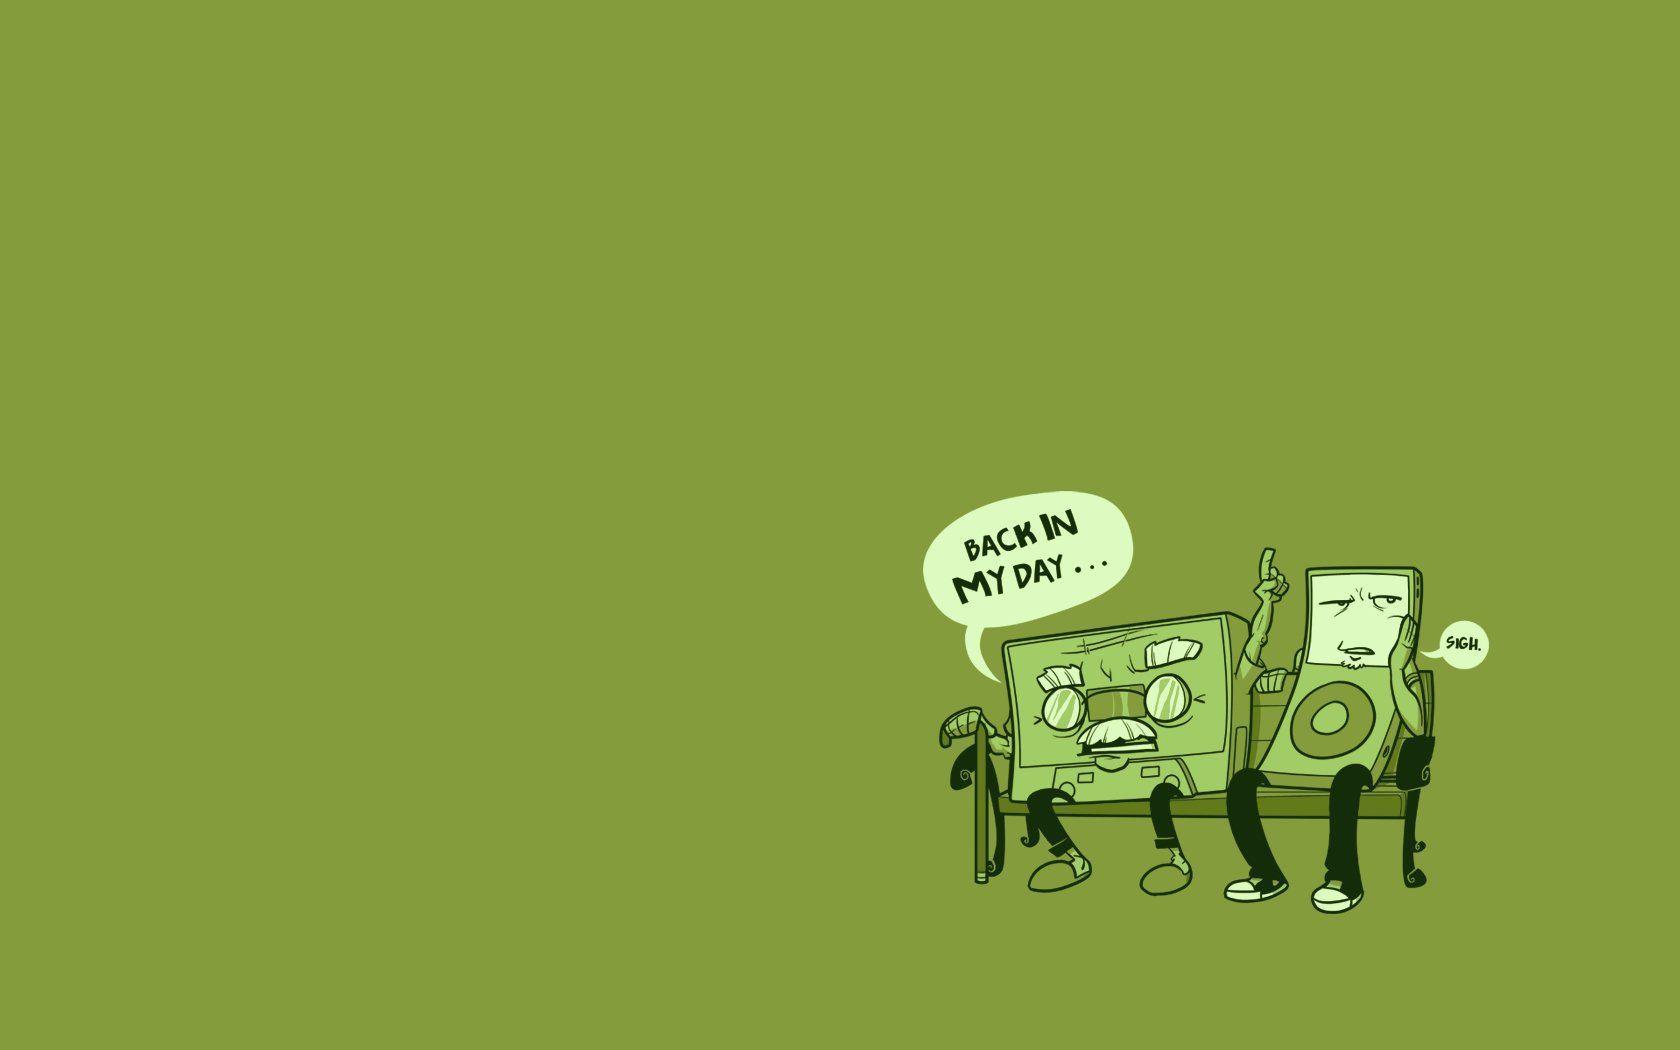 Funny Image HD Wallpaper 5 Another Entertainment Source